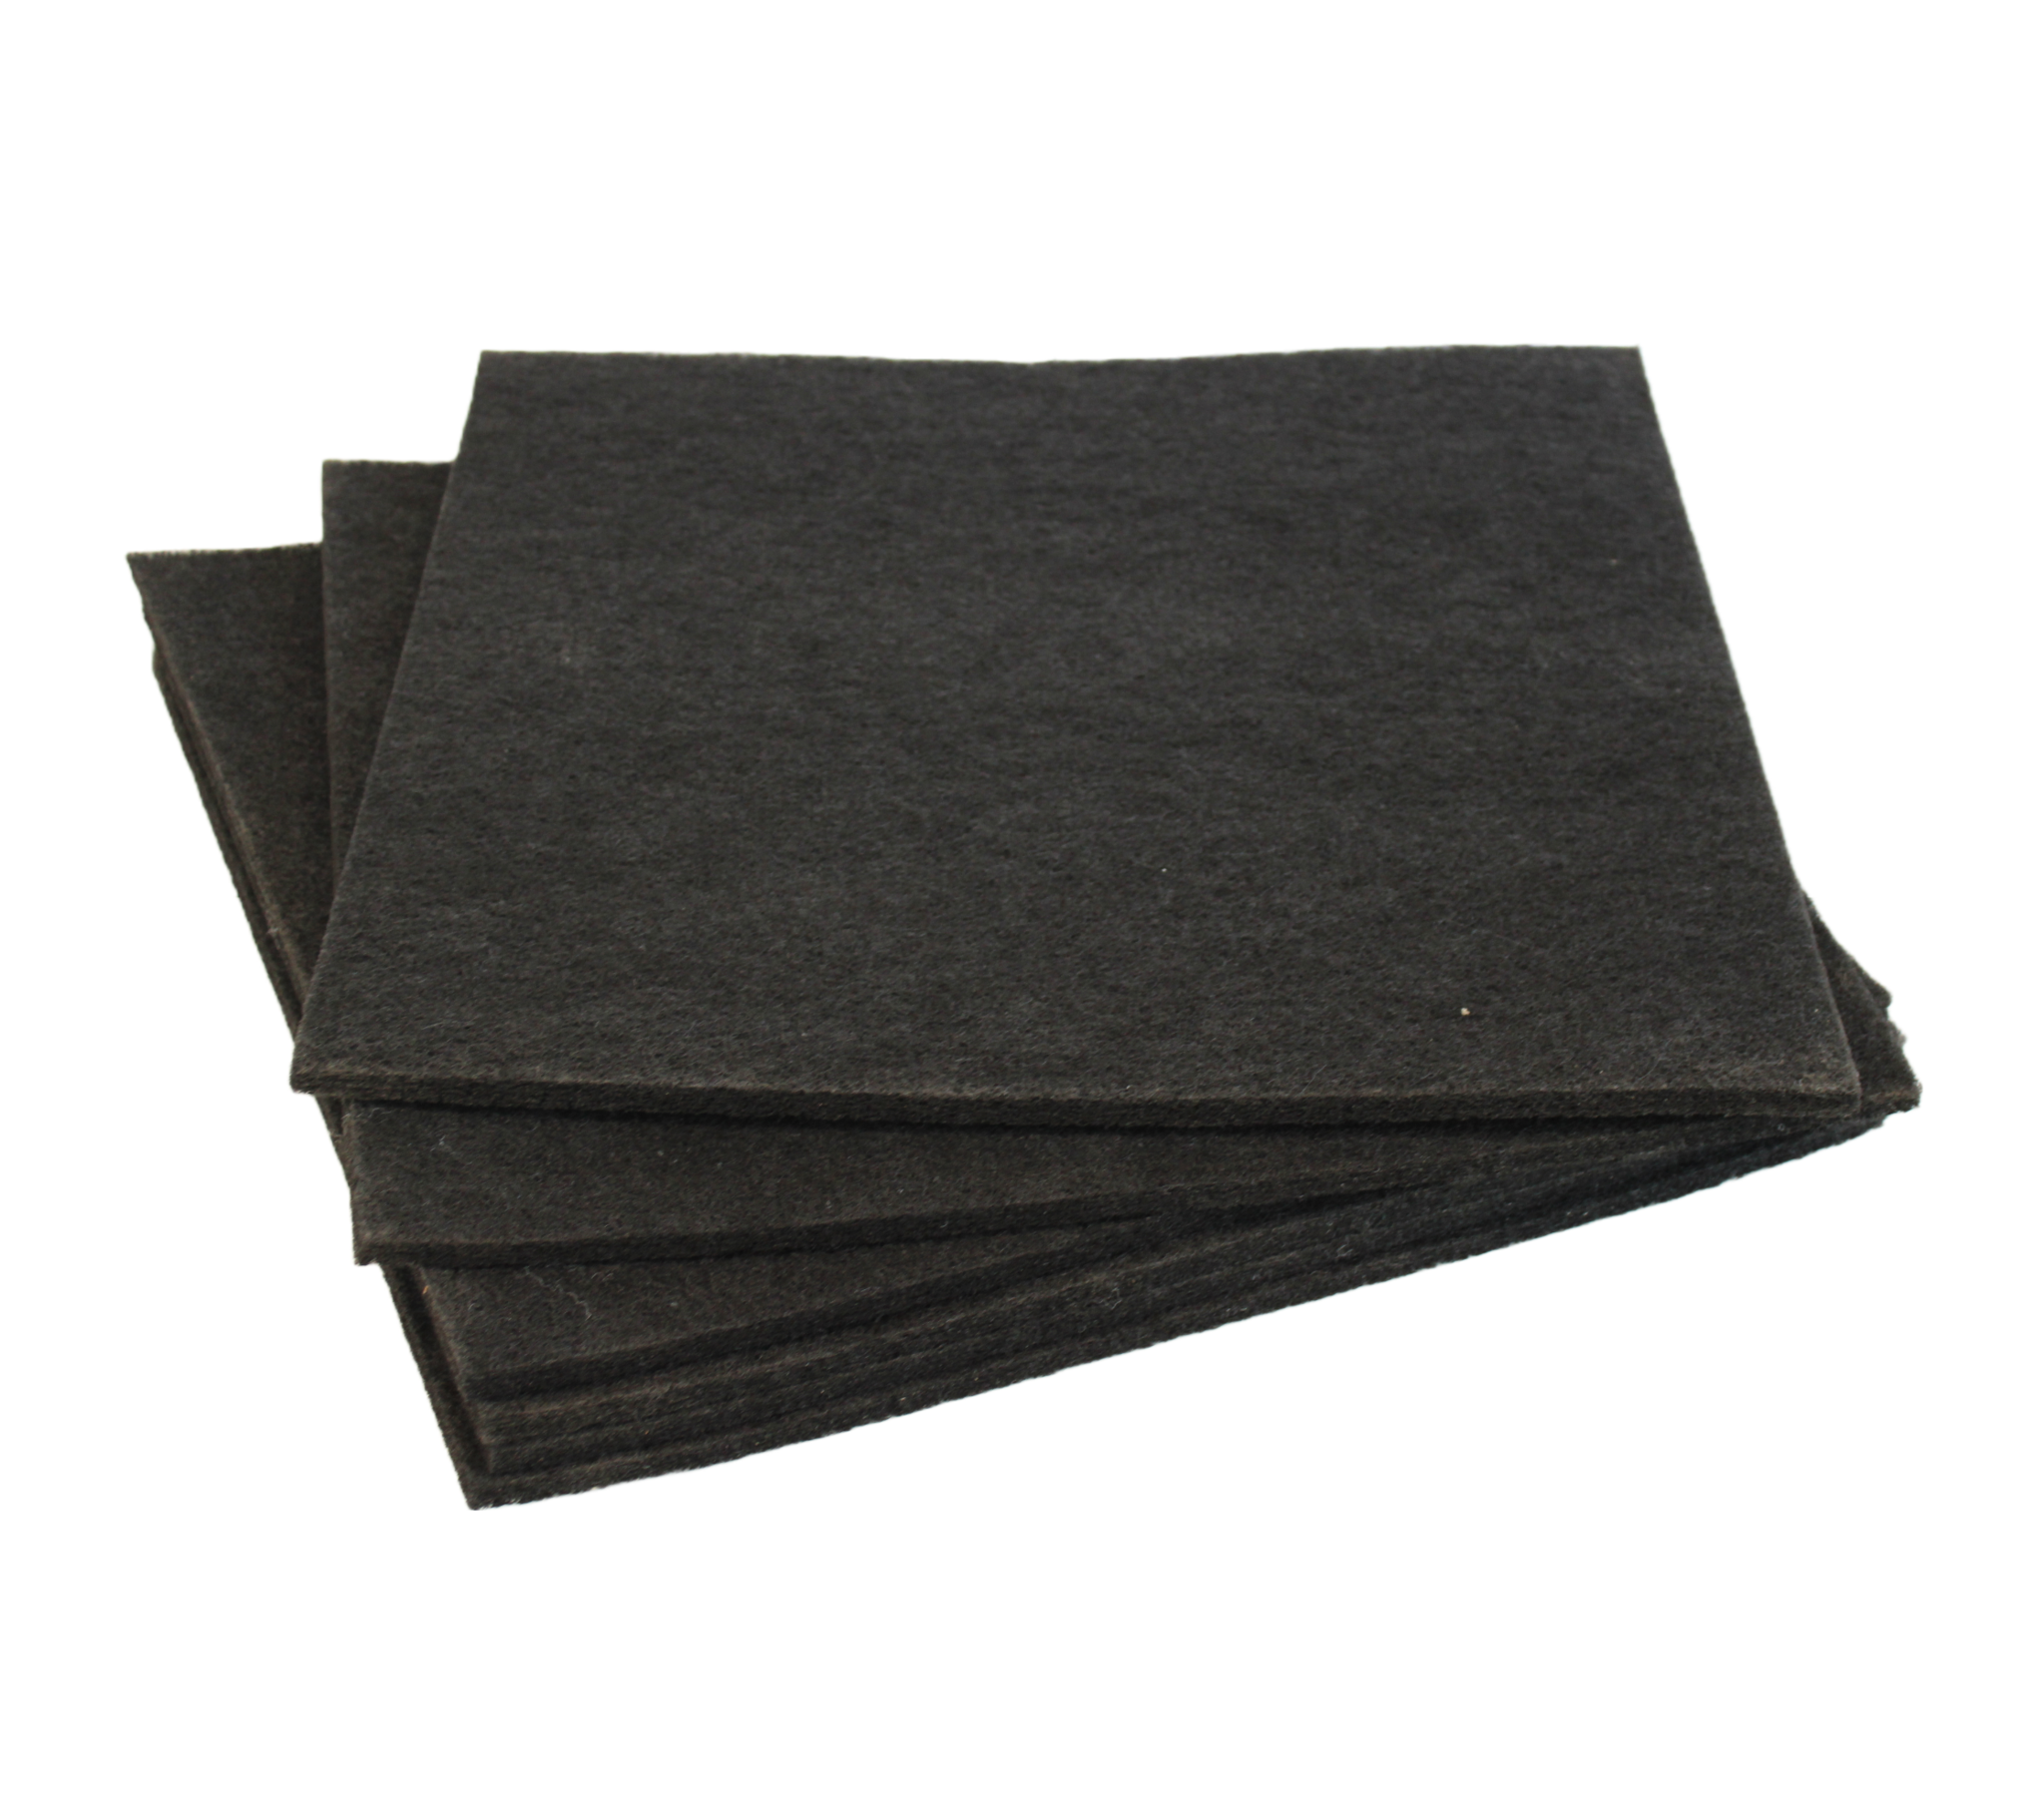 5 m² G4 filtermats role - The Shop of Filter Mats